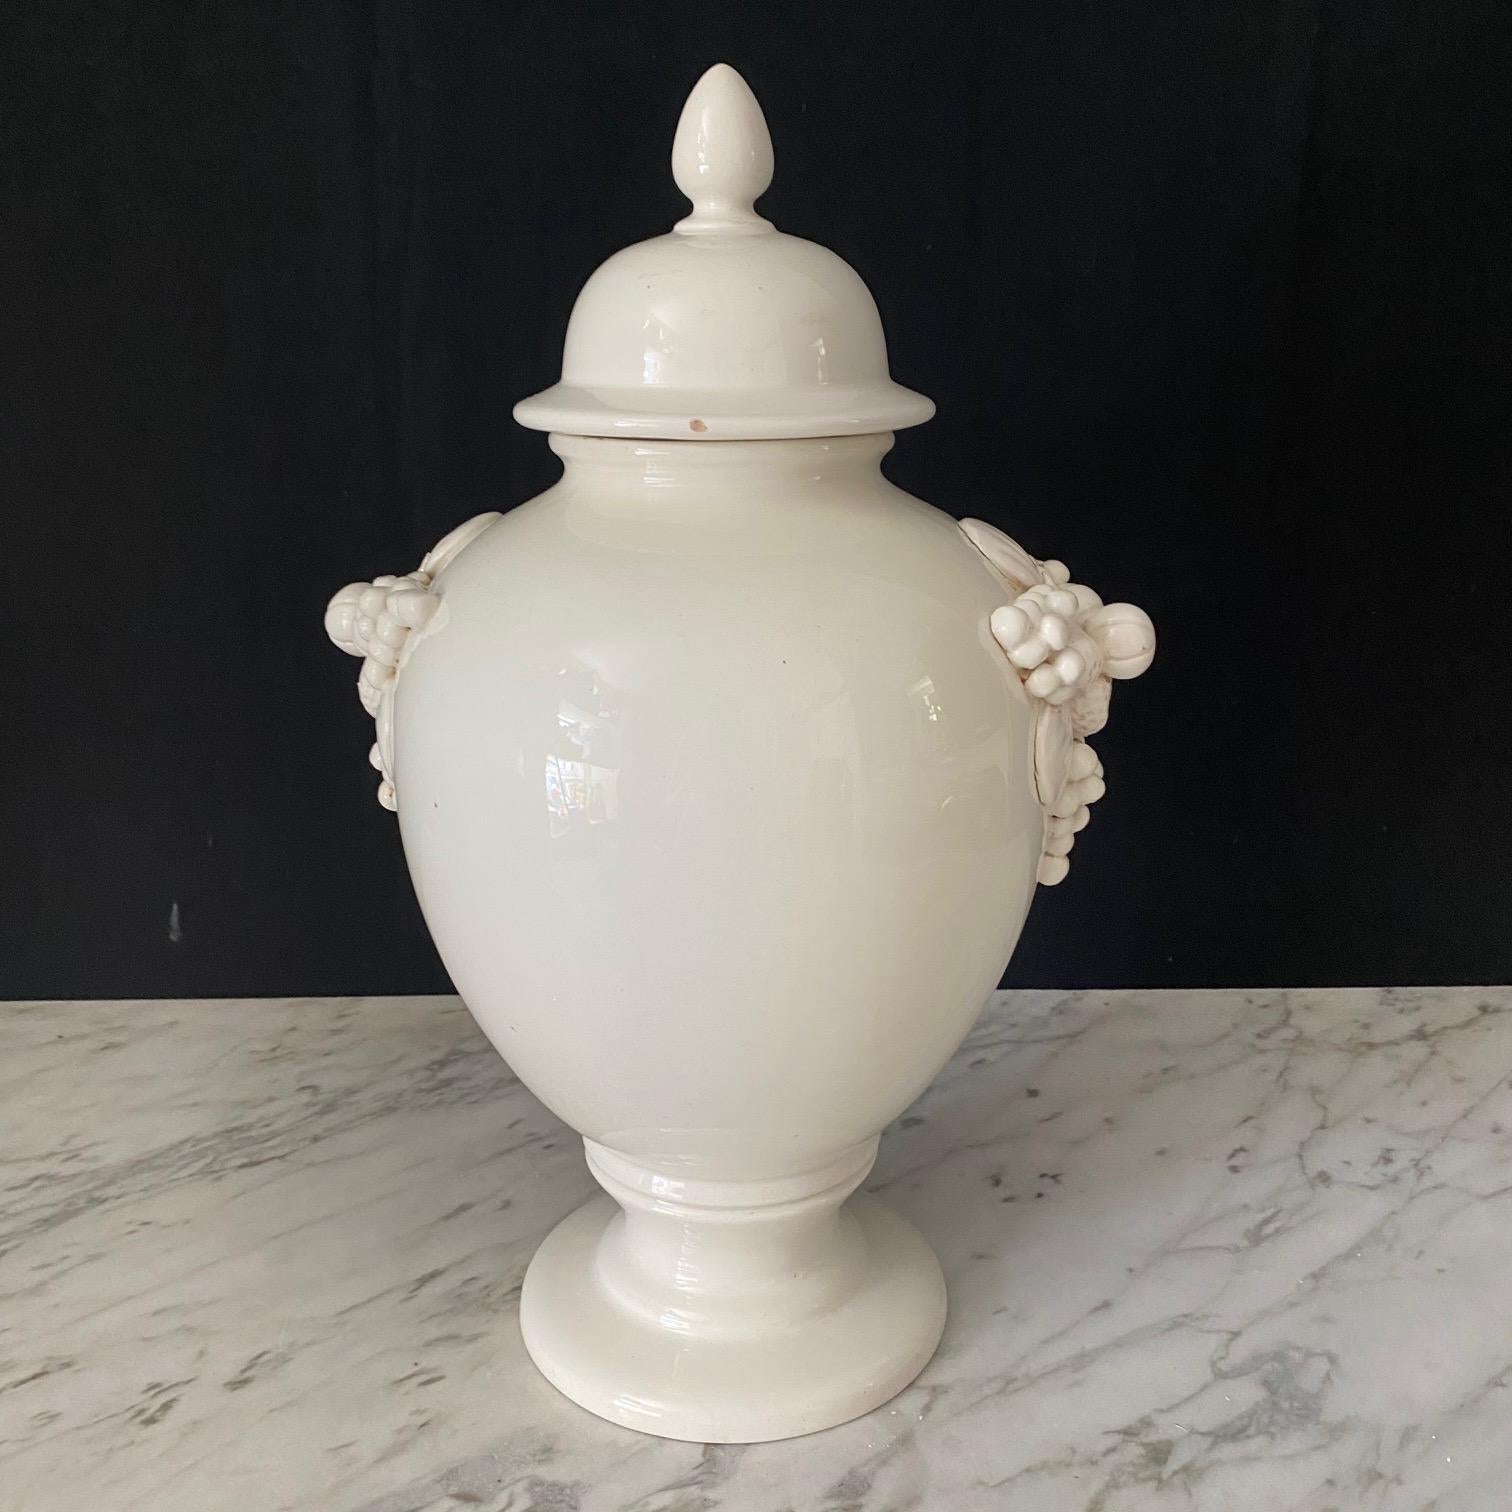  Large Antique Italian Pair of White Ceramic Apothecary Style Urn Vases  For Sale 1